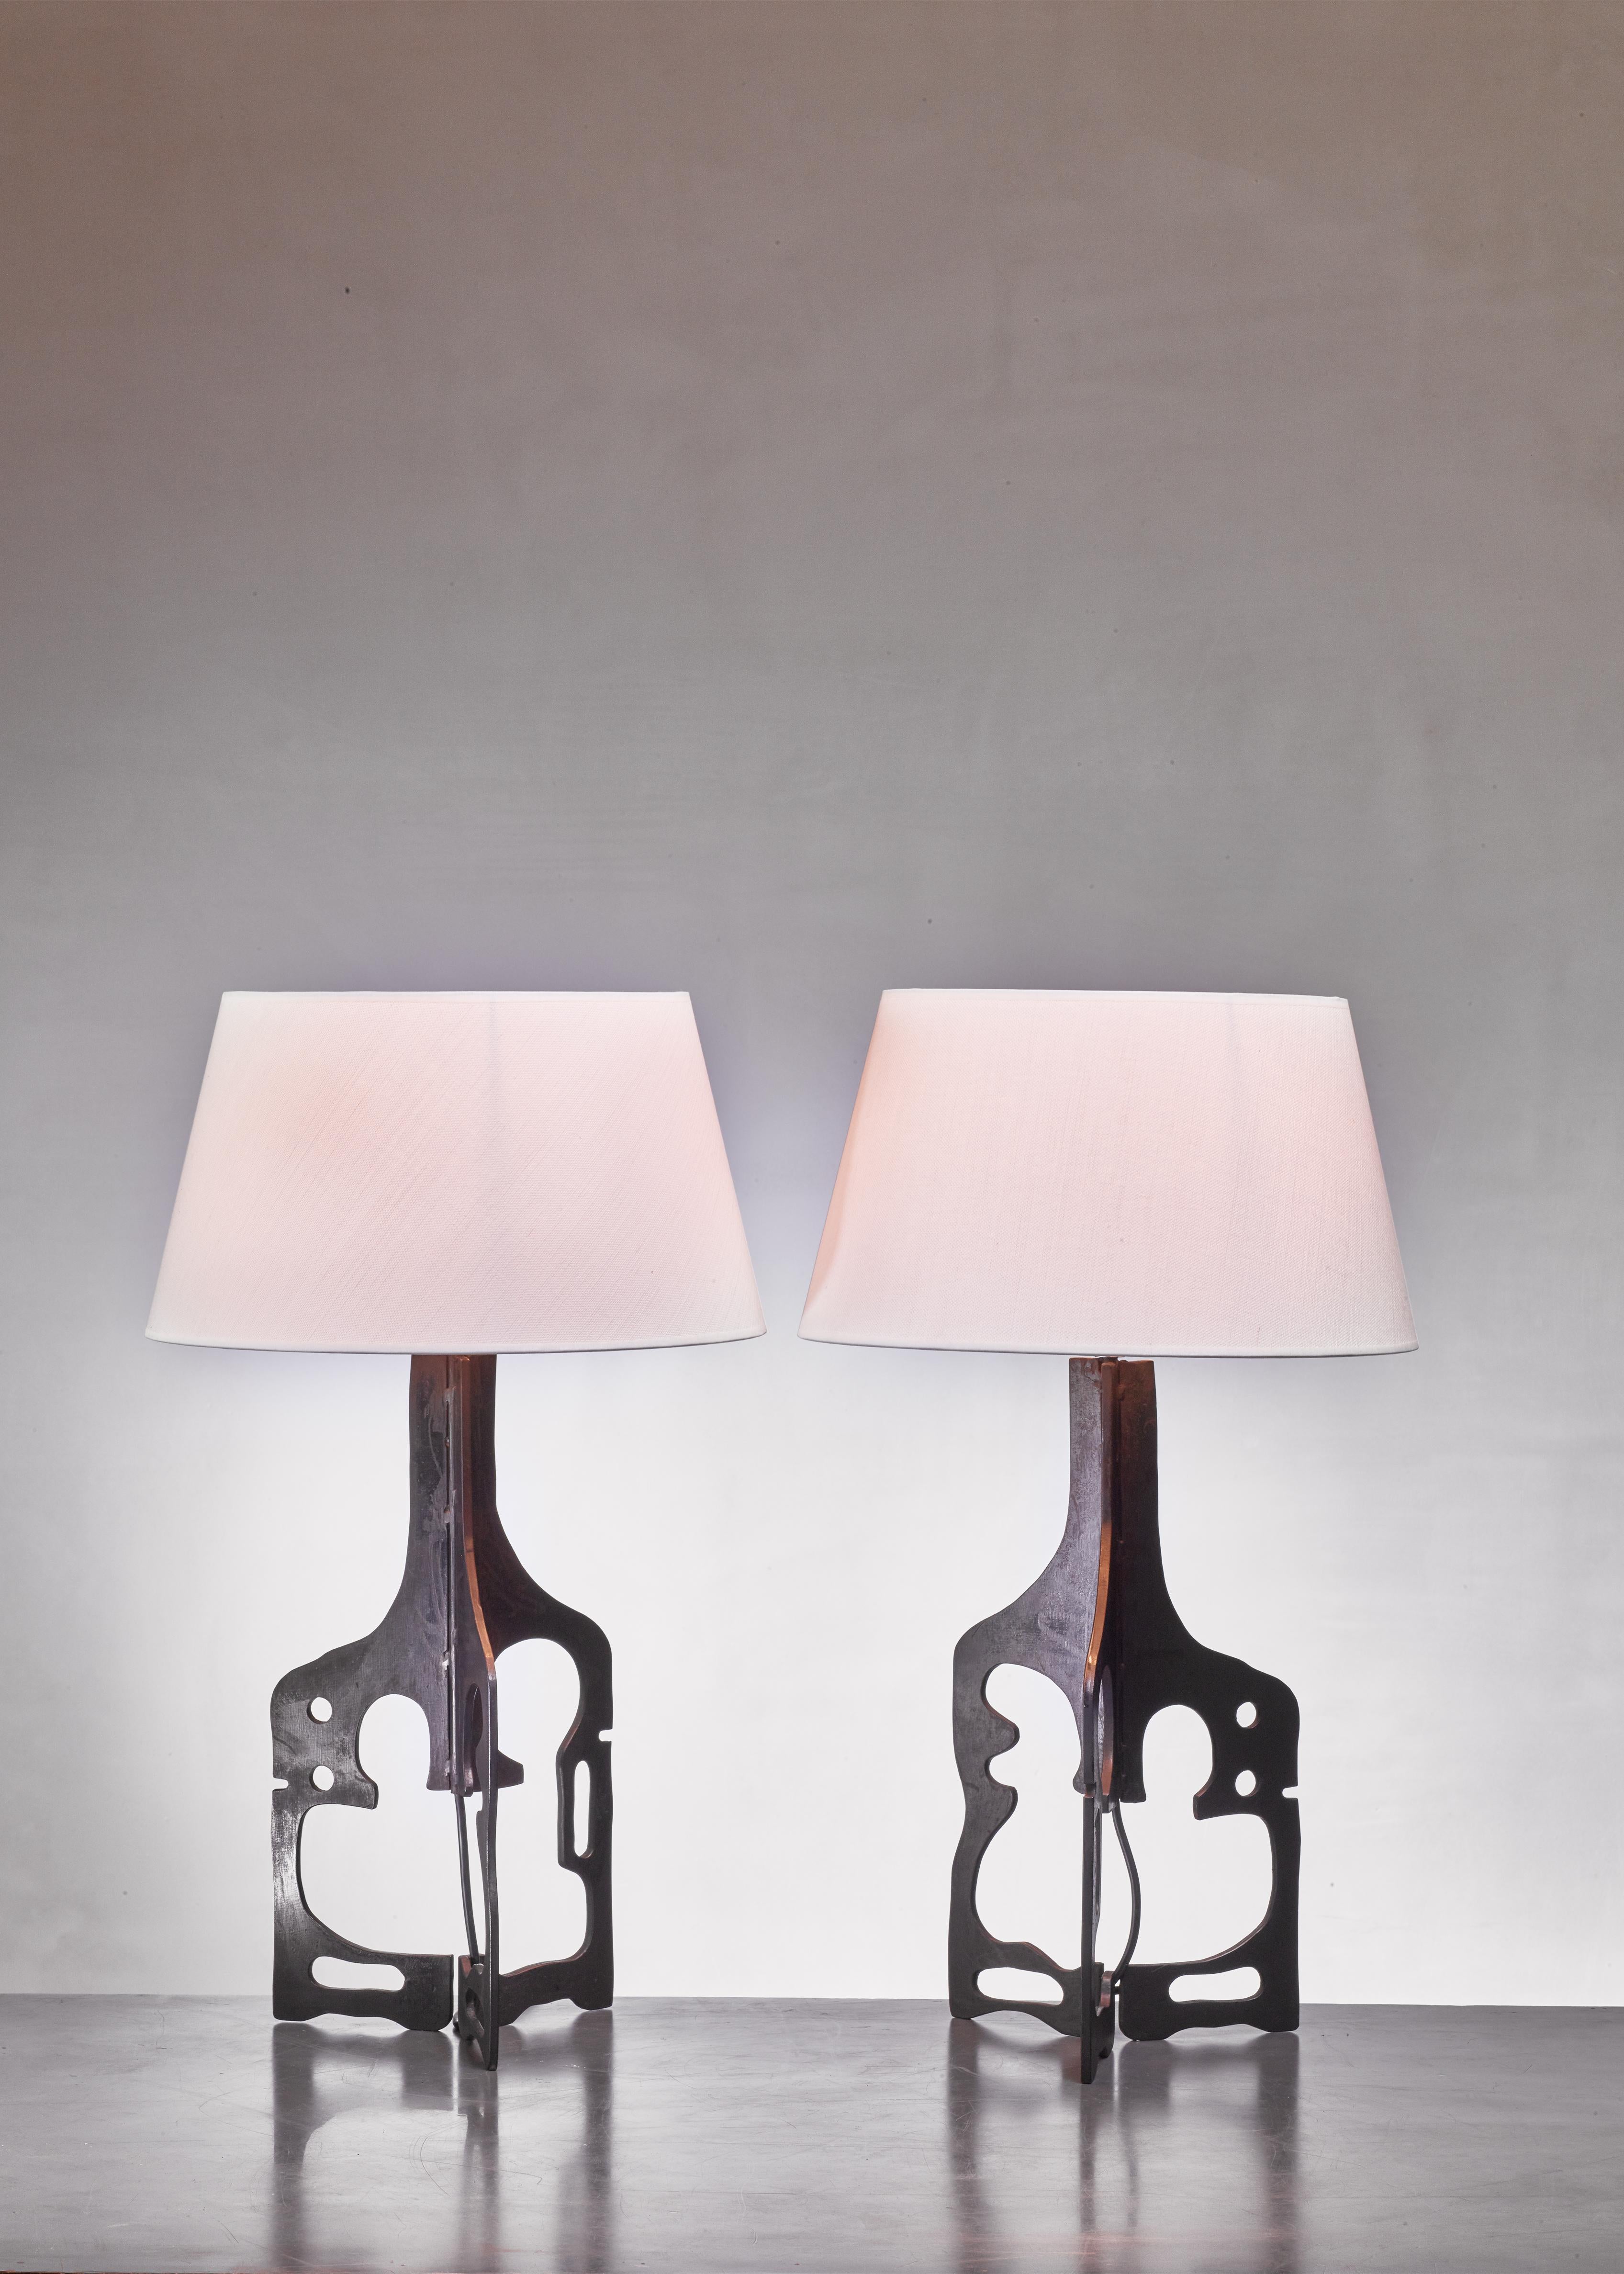 Iron Based Sculptural Floor Lamp, Germany, 1950s For Sale 1